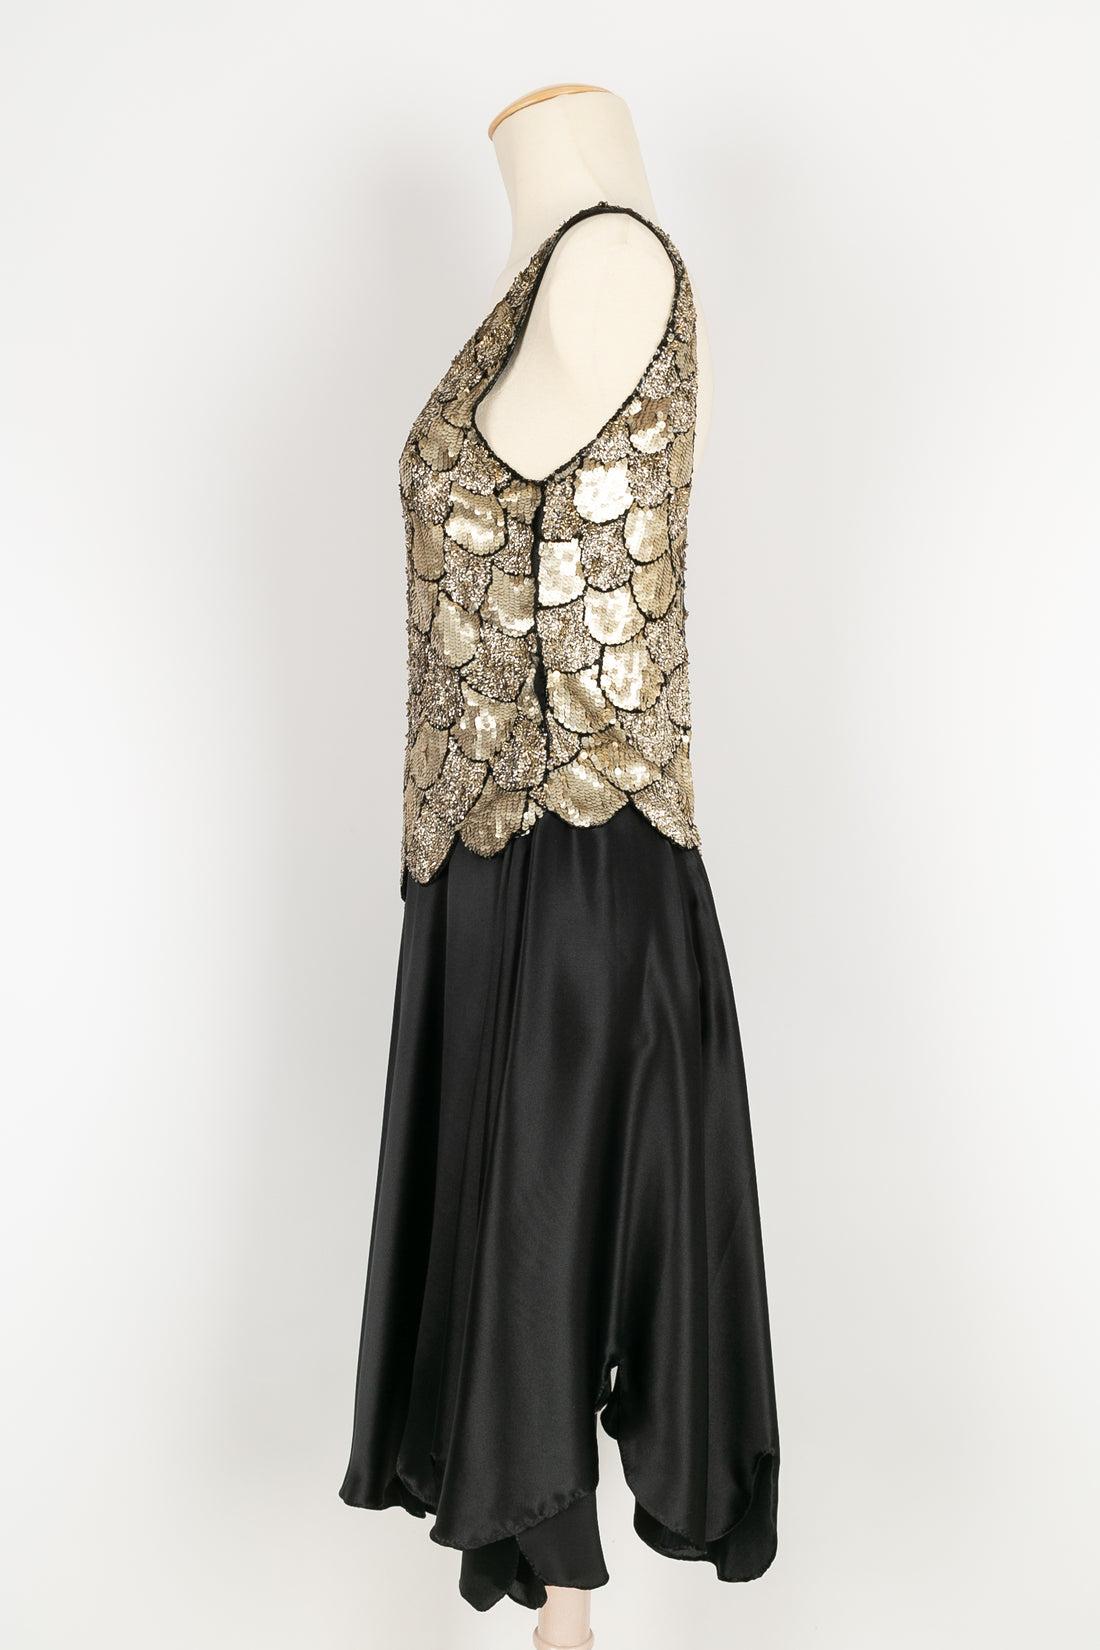 30's black silk dress topped with a top fully embroidered with gold sequins. No composition label or size listed, it fits a 38FR.

Additional information: 
Dimensions: Chest: 40 cm, Waist: 36 cm, Length: 100 cm
Condition: Very good condition
Seller